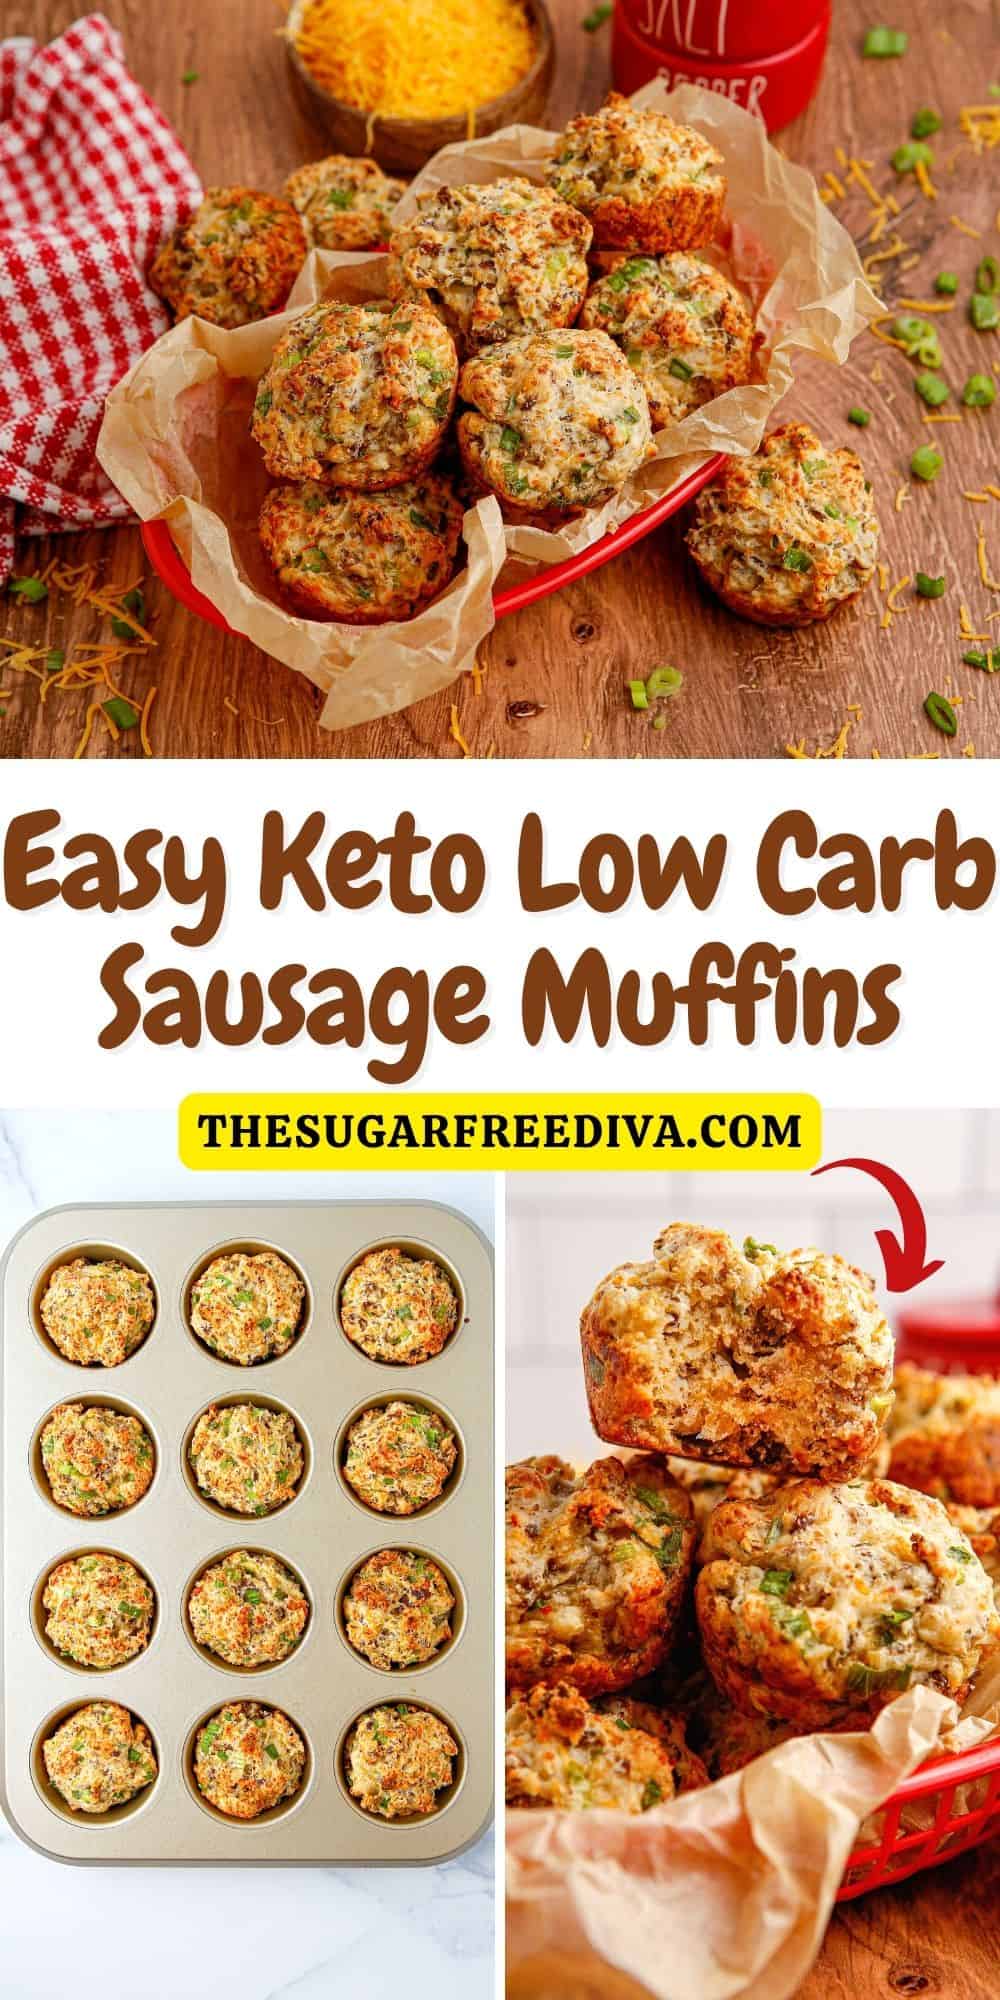 Easy Keto Low Carb Sausage Muffins, a simple five ingredient breakfast or brunch recipe made with baking mix and breakfast sausage.